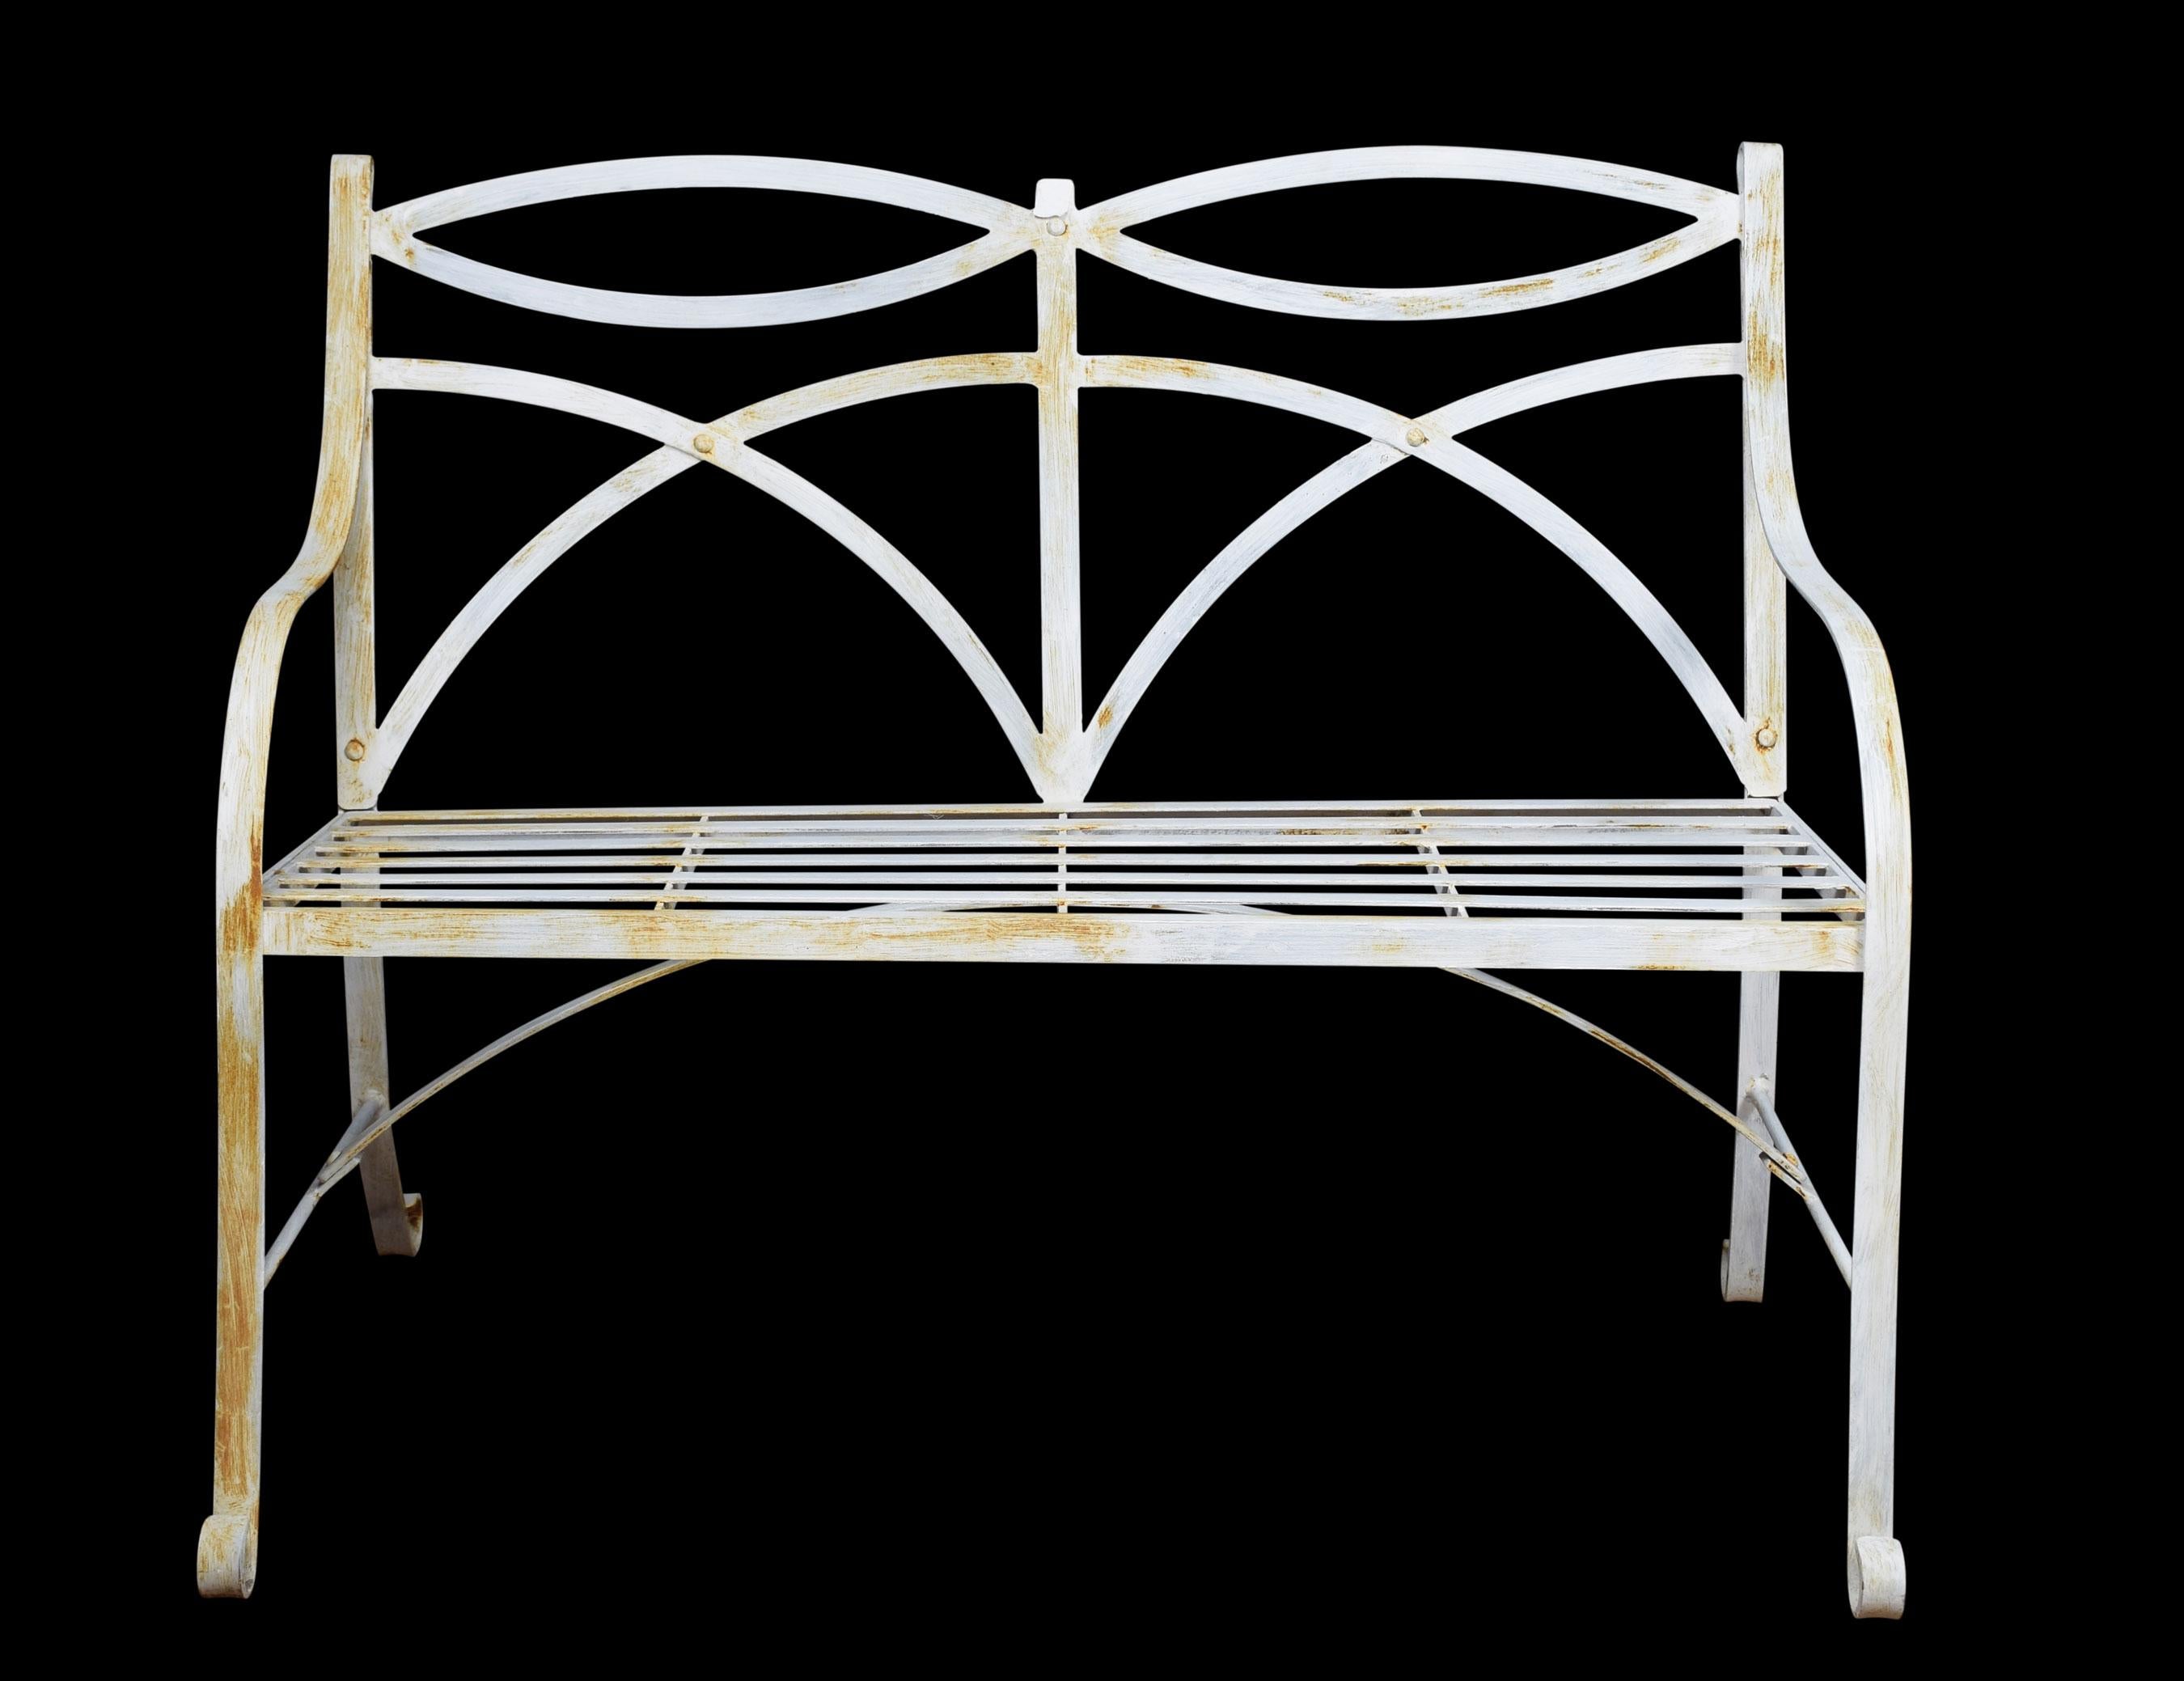 20th Century Pair of Regency Style White Painted Metal Garden Benches